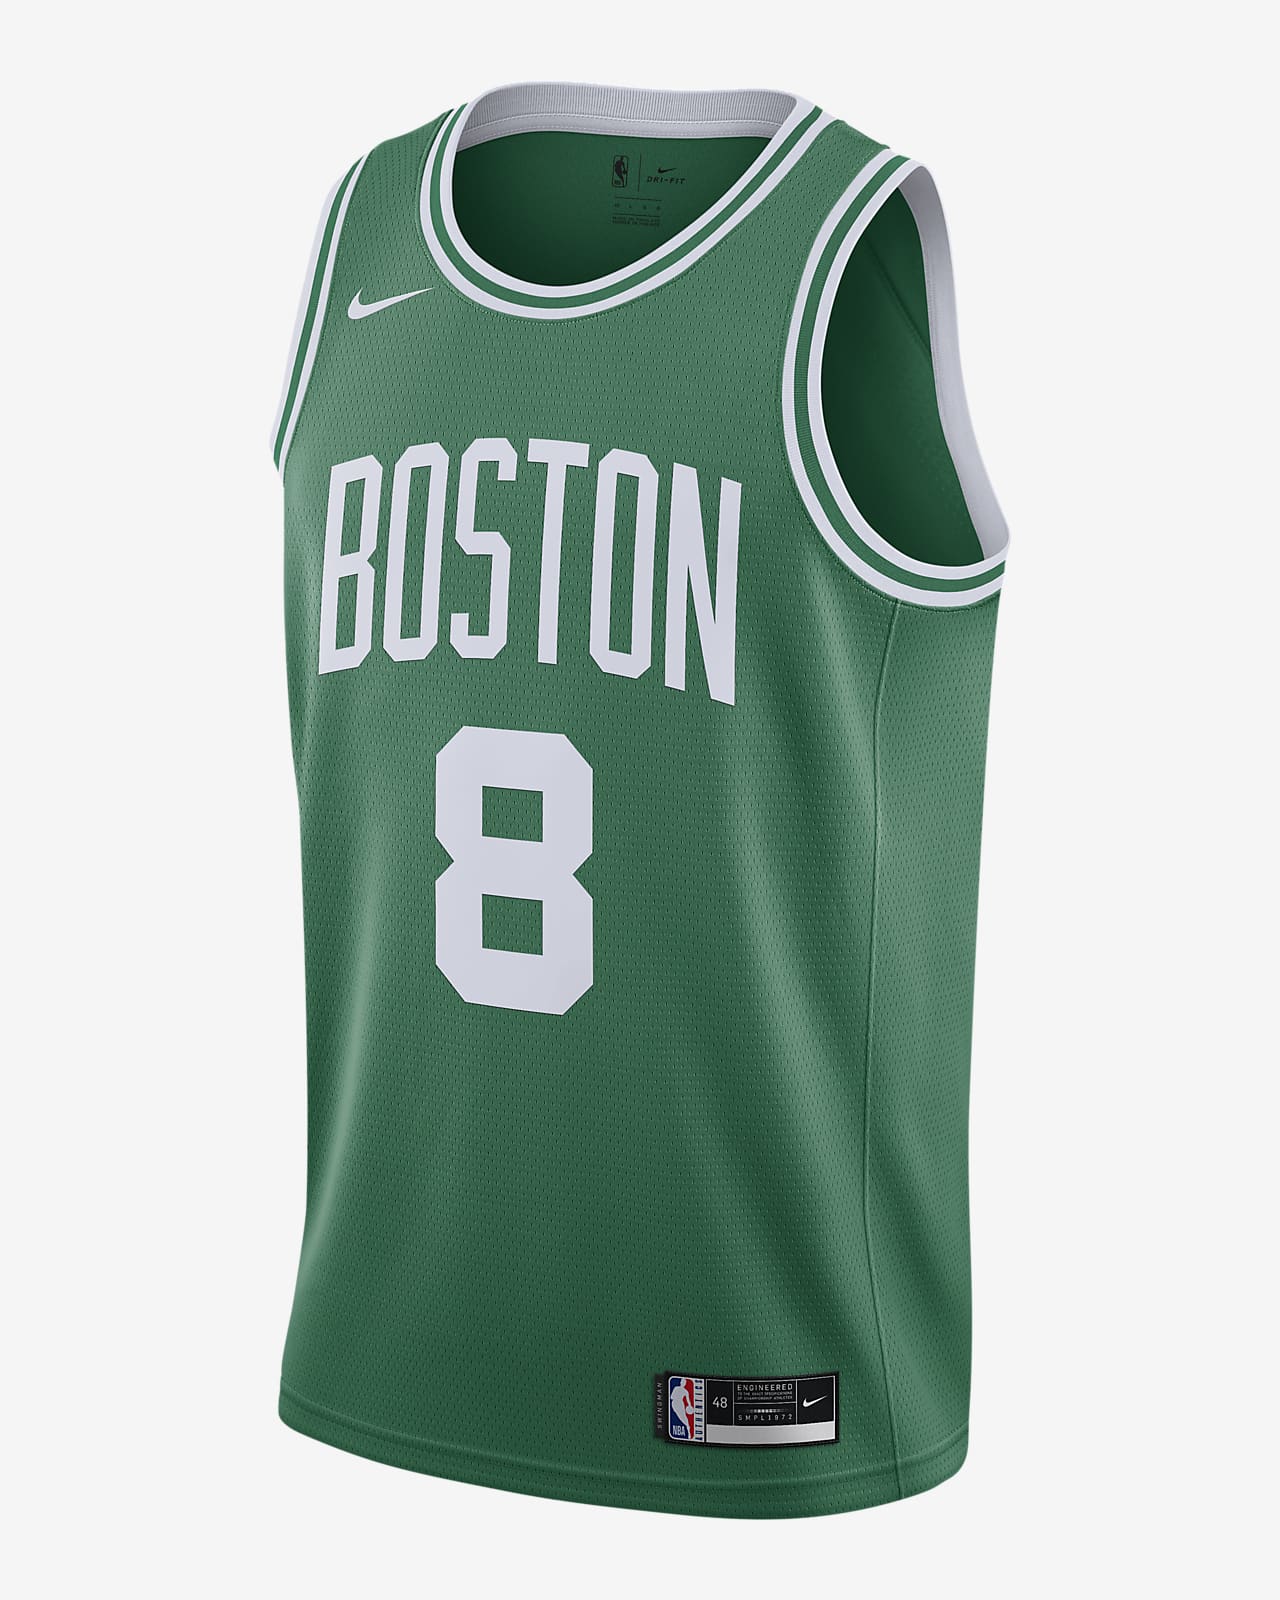 white and green celtics jersey